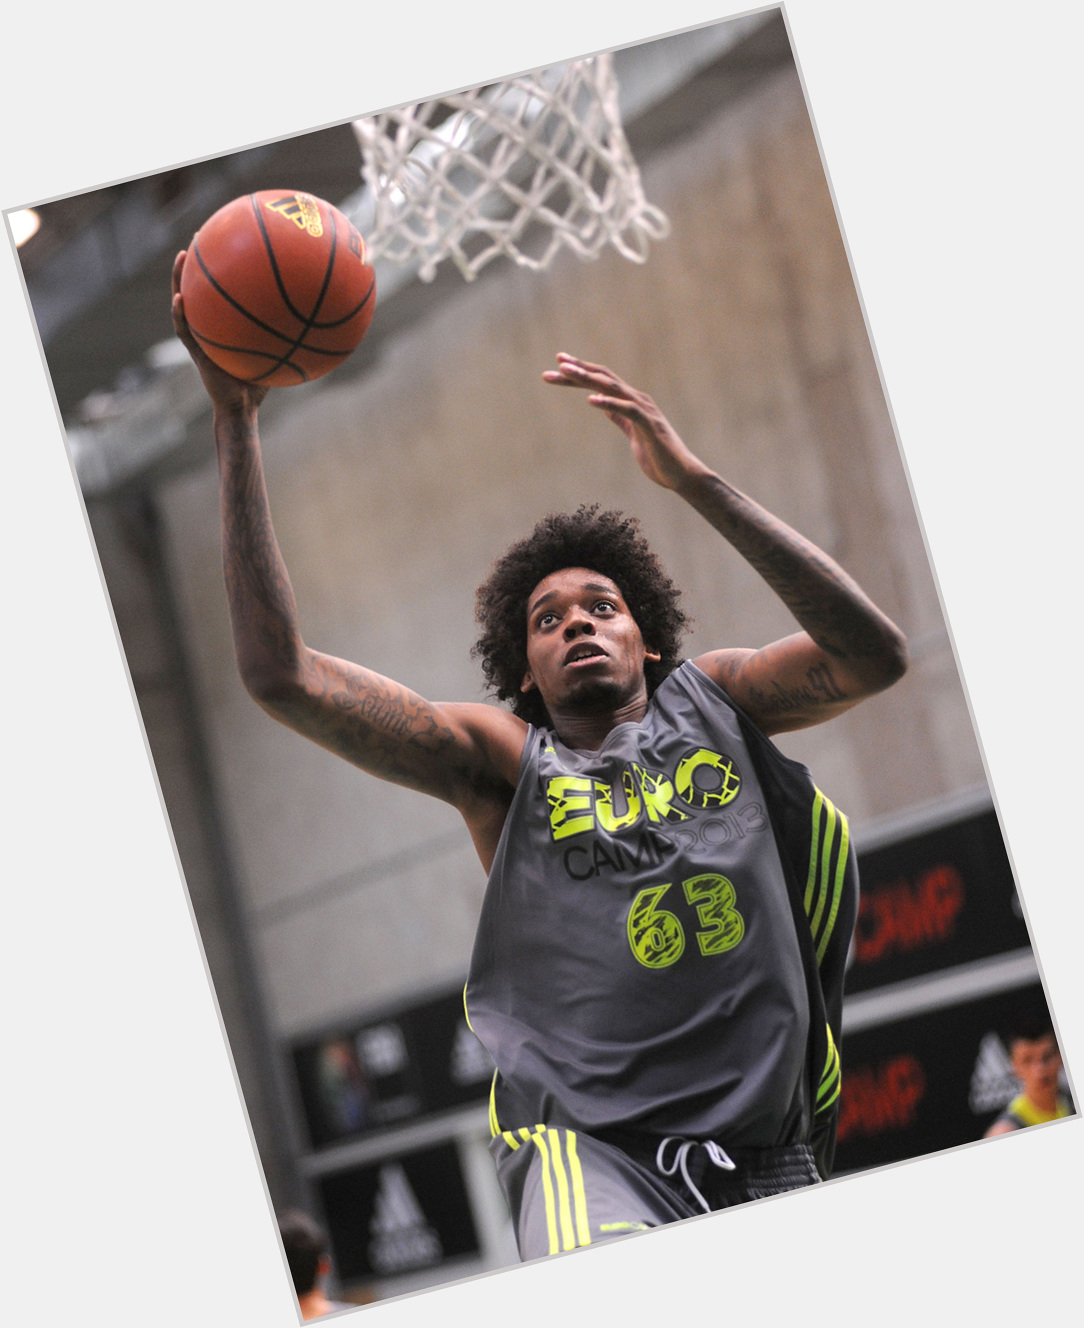 Lucas Nogueira Athletic body,  black hair & hairstyles